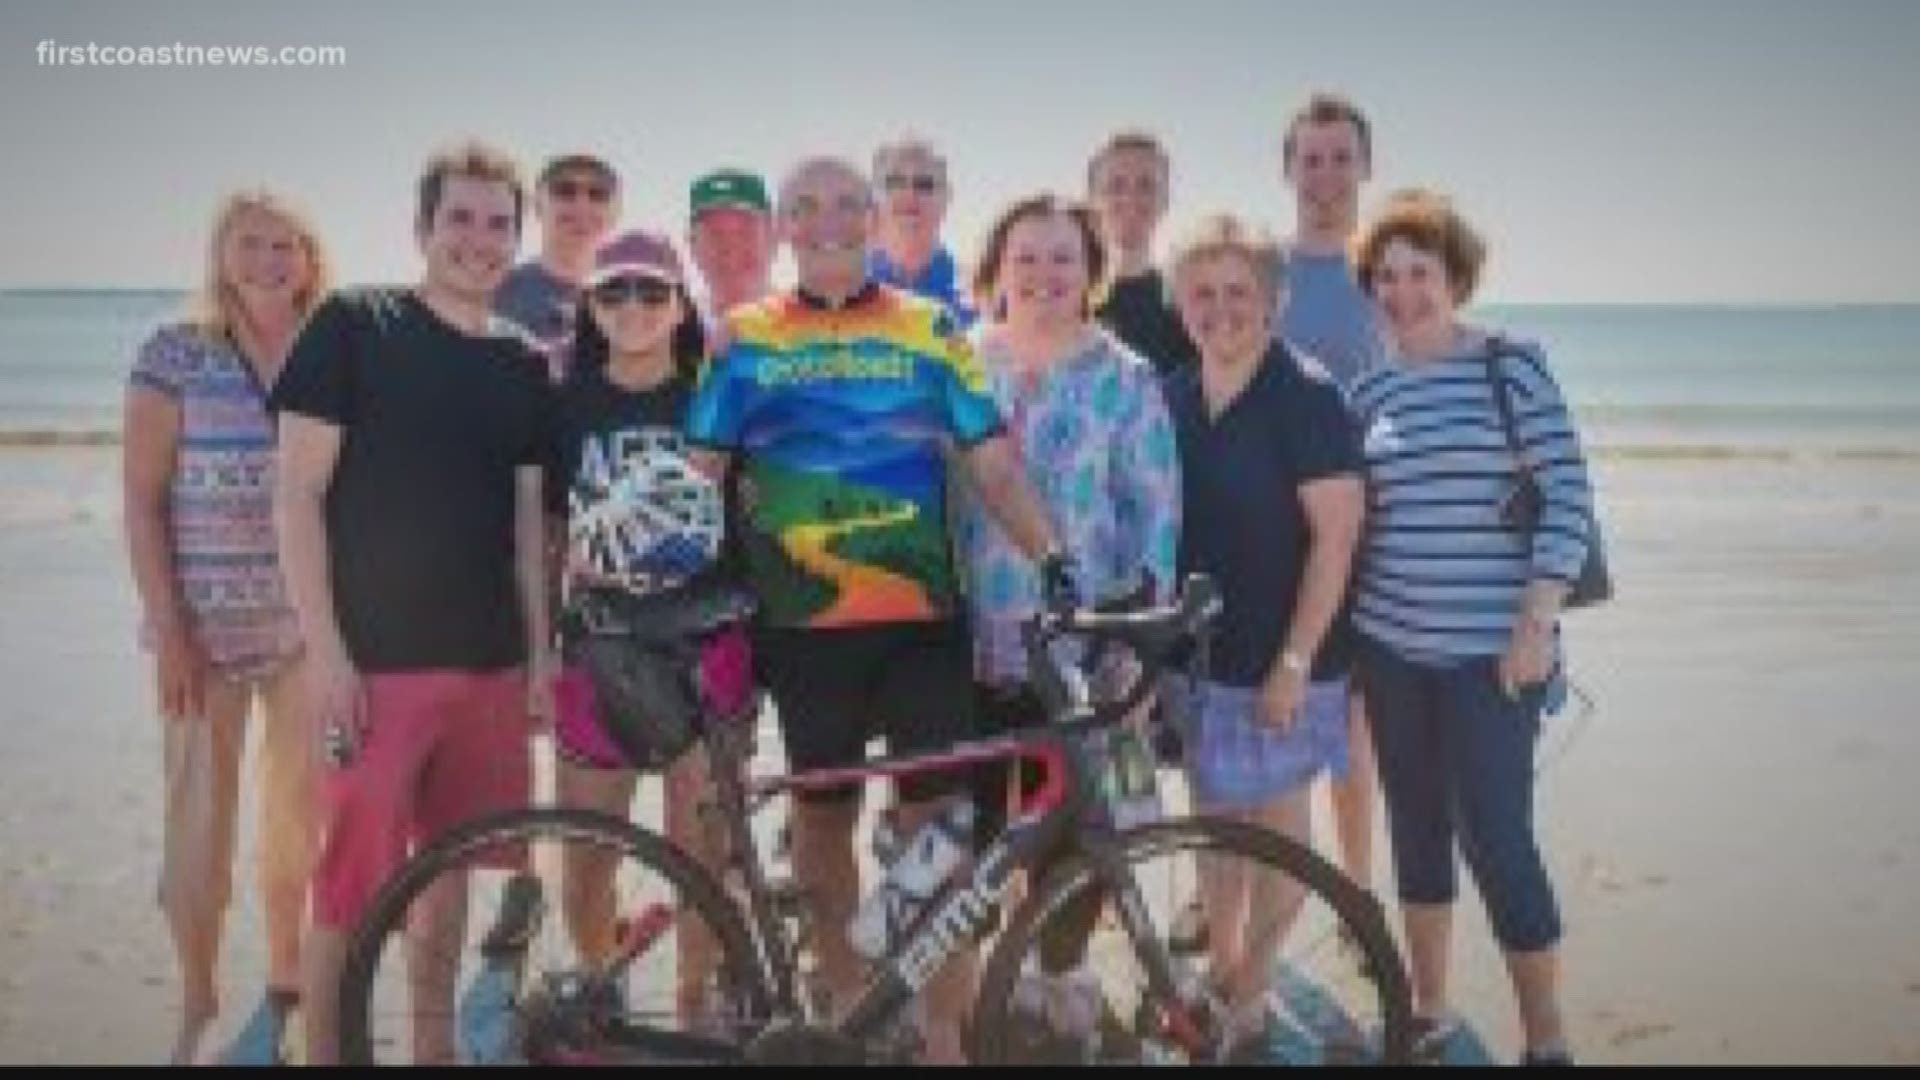 A Florida man went on a cross-country trip to raise money for Waldenstrom macroglobulinemia, a type of blood cancer. He raised almost $50,000 for the rare type of cancer.